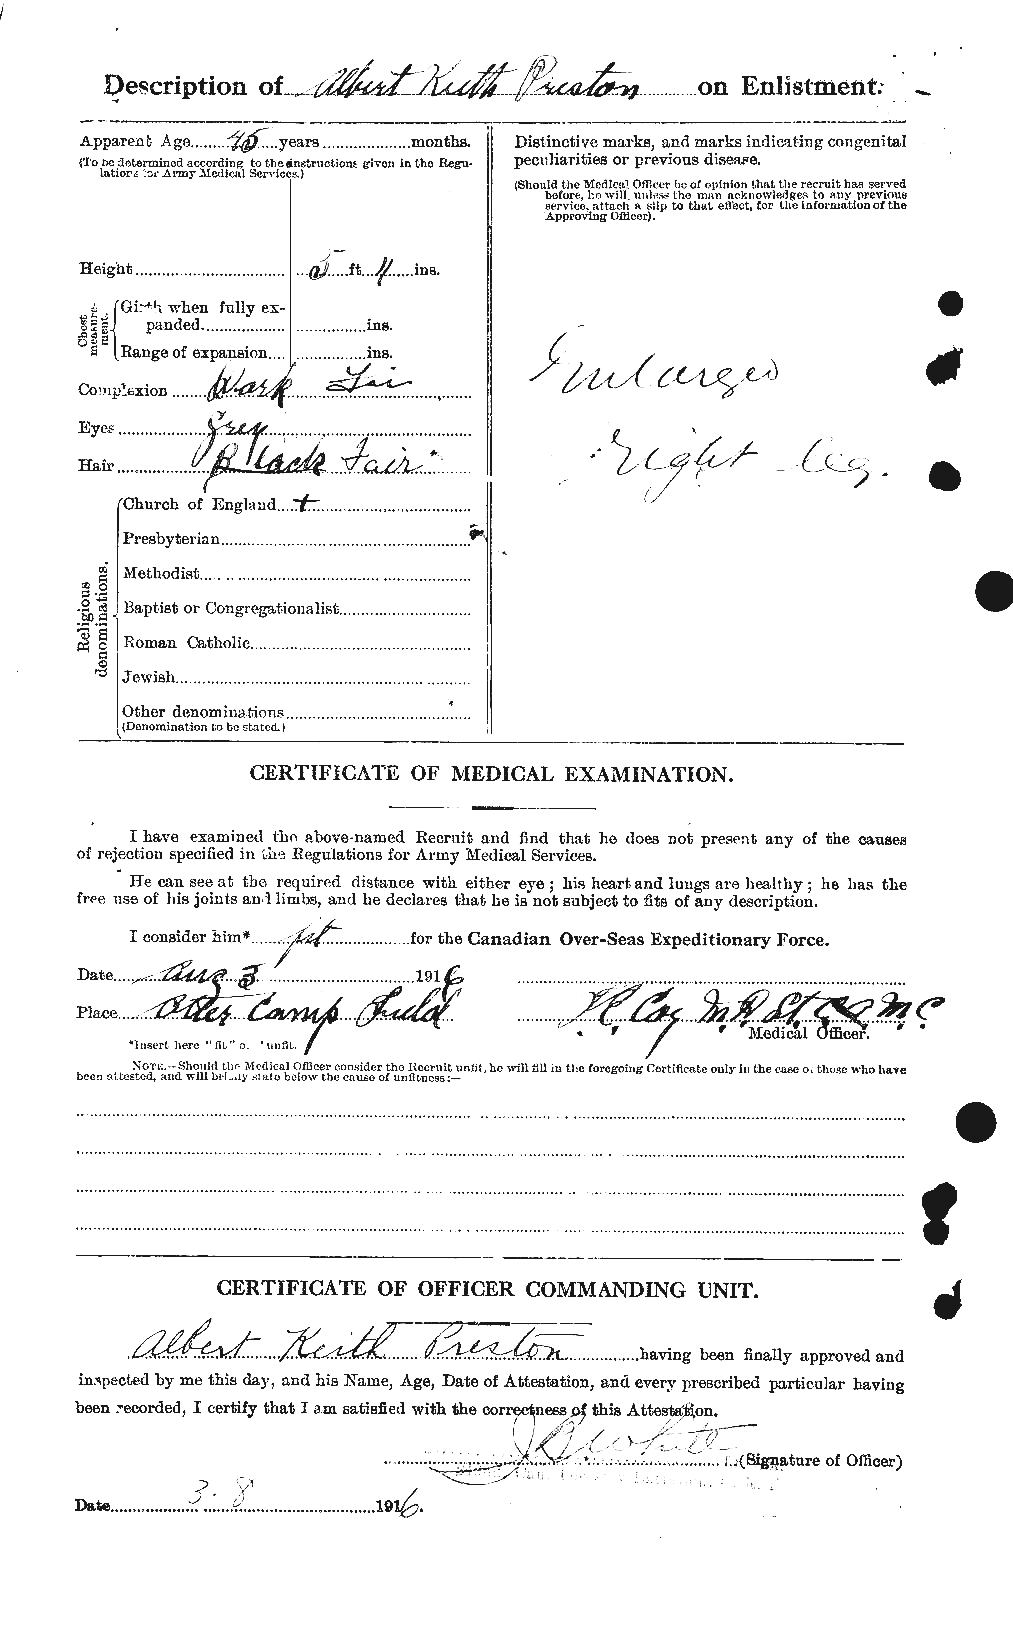 Personnel Records of the First World War - CEF 584348b